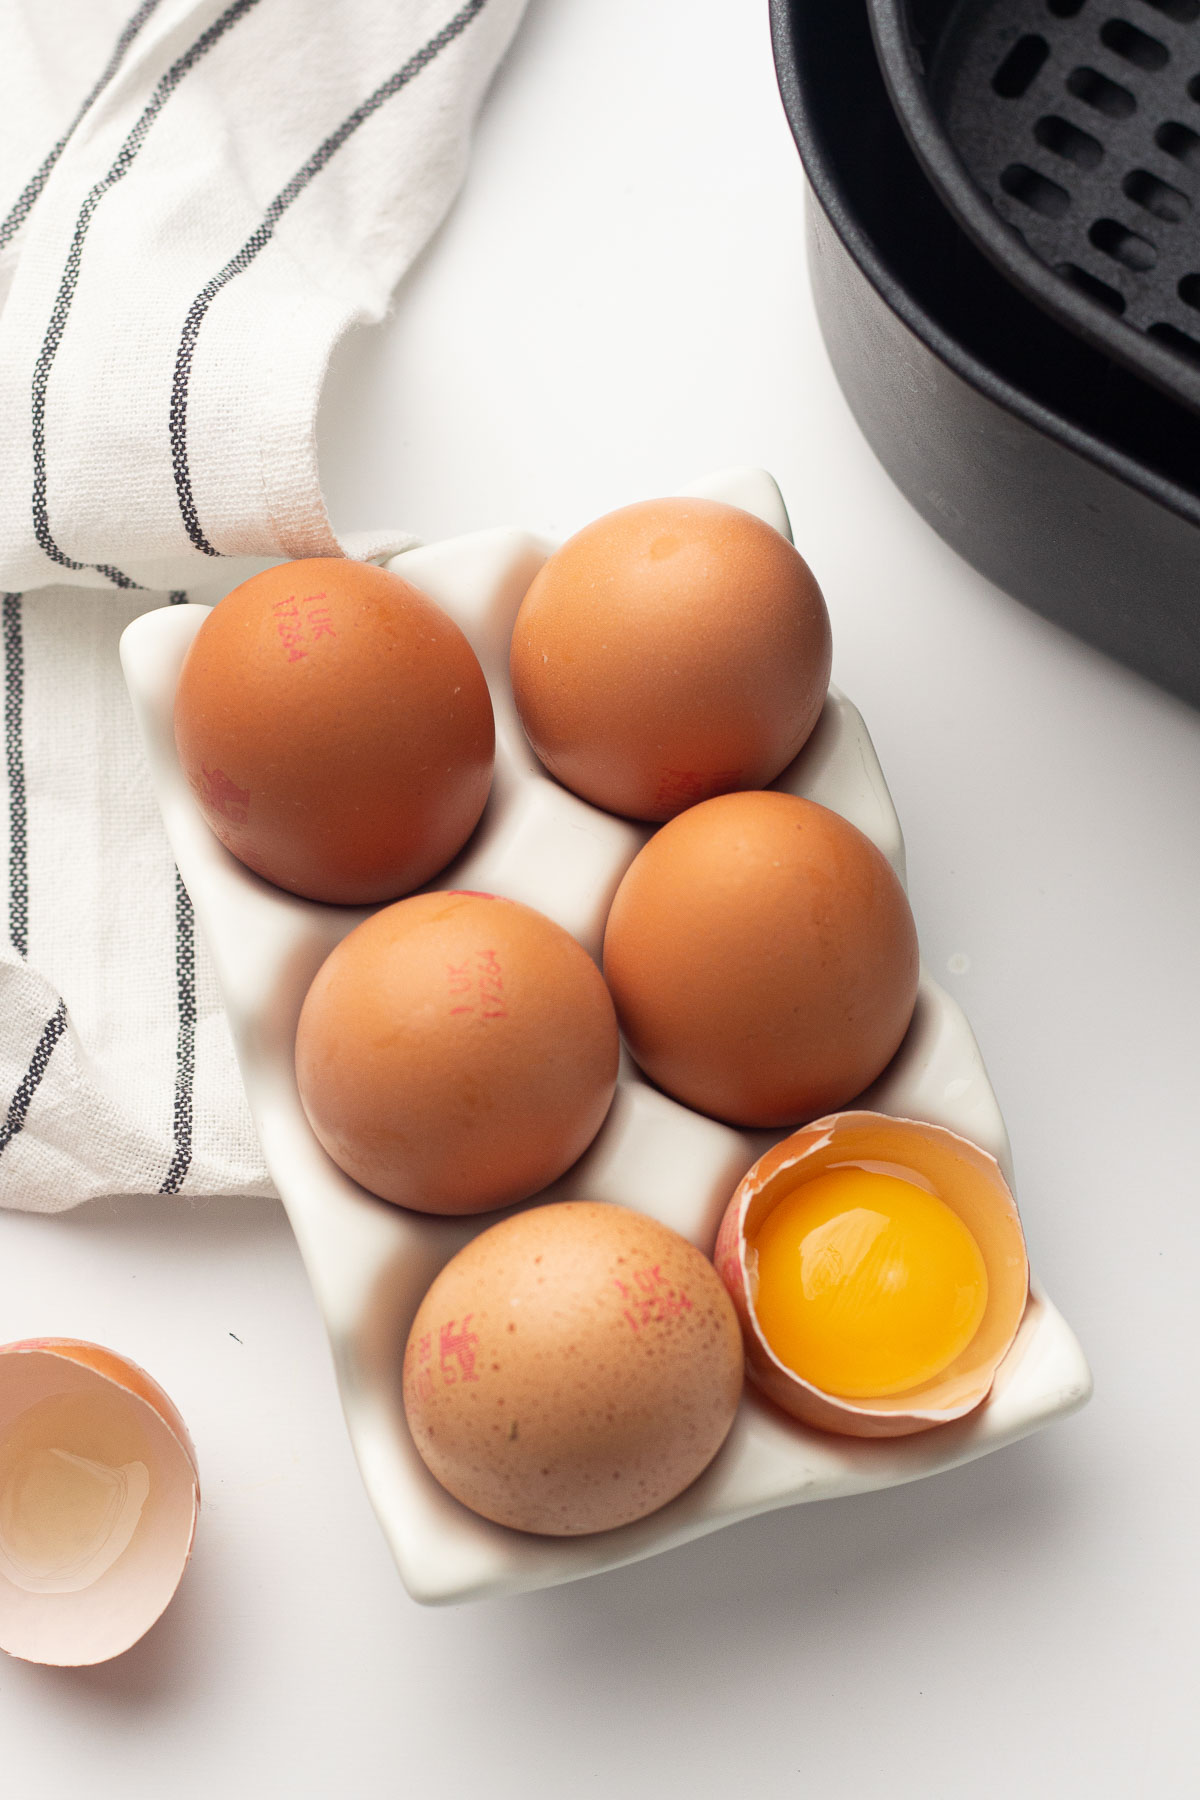 White egg tray holding six brown eggs. One egg is cracked in half to show the yolk inside.